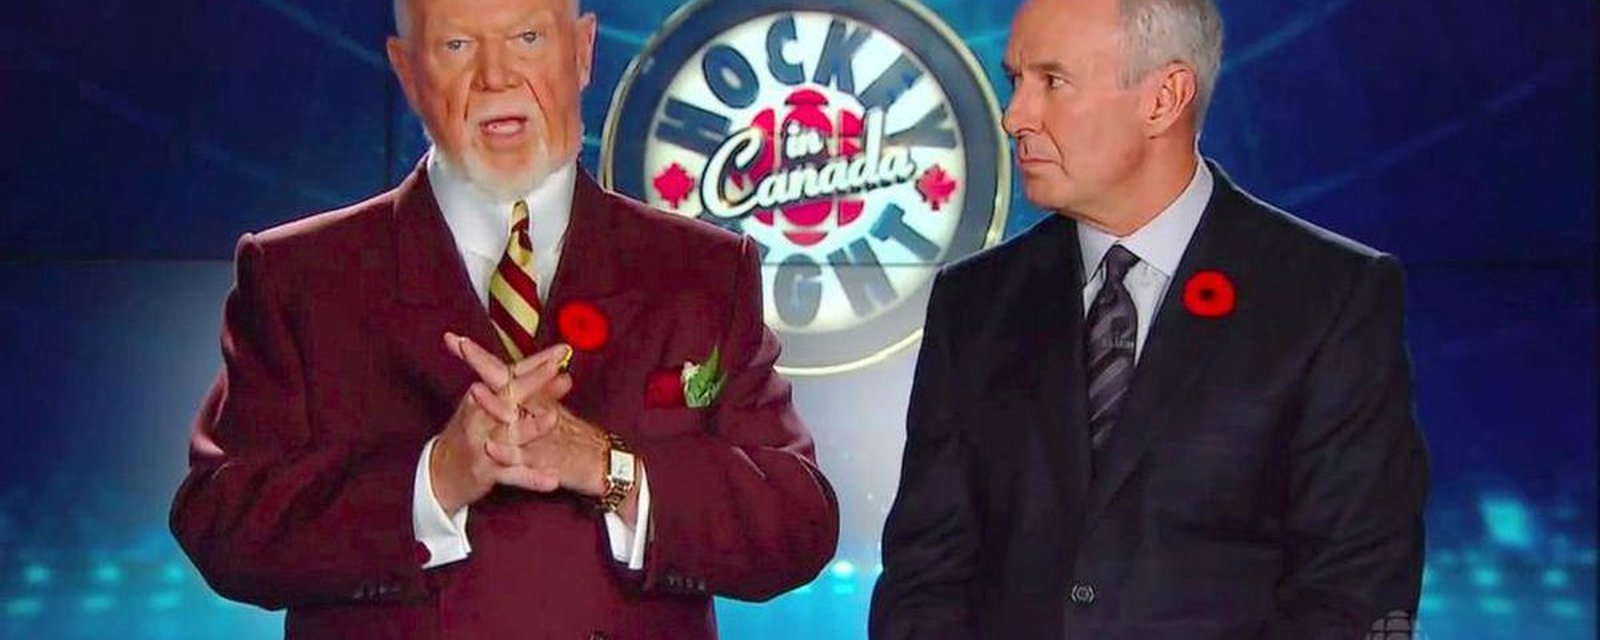 Ron MacLean breaks silence on Don Cherry's termination and end of Coach's Corner